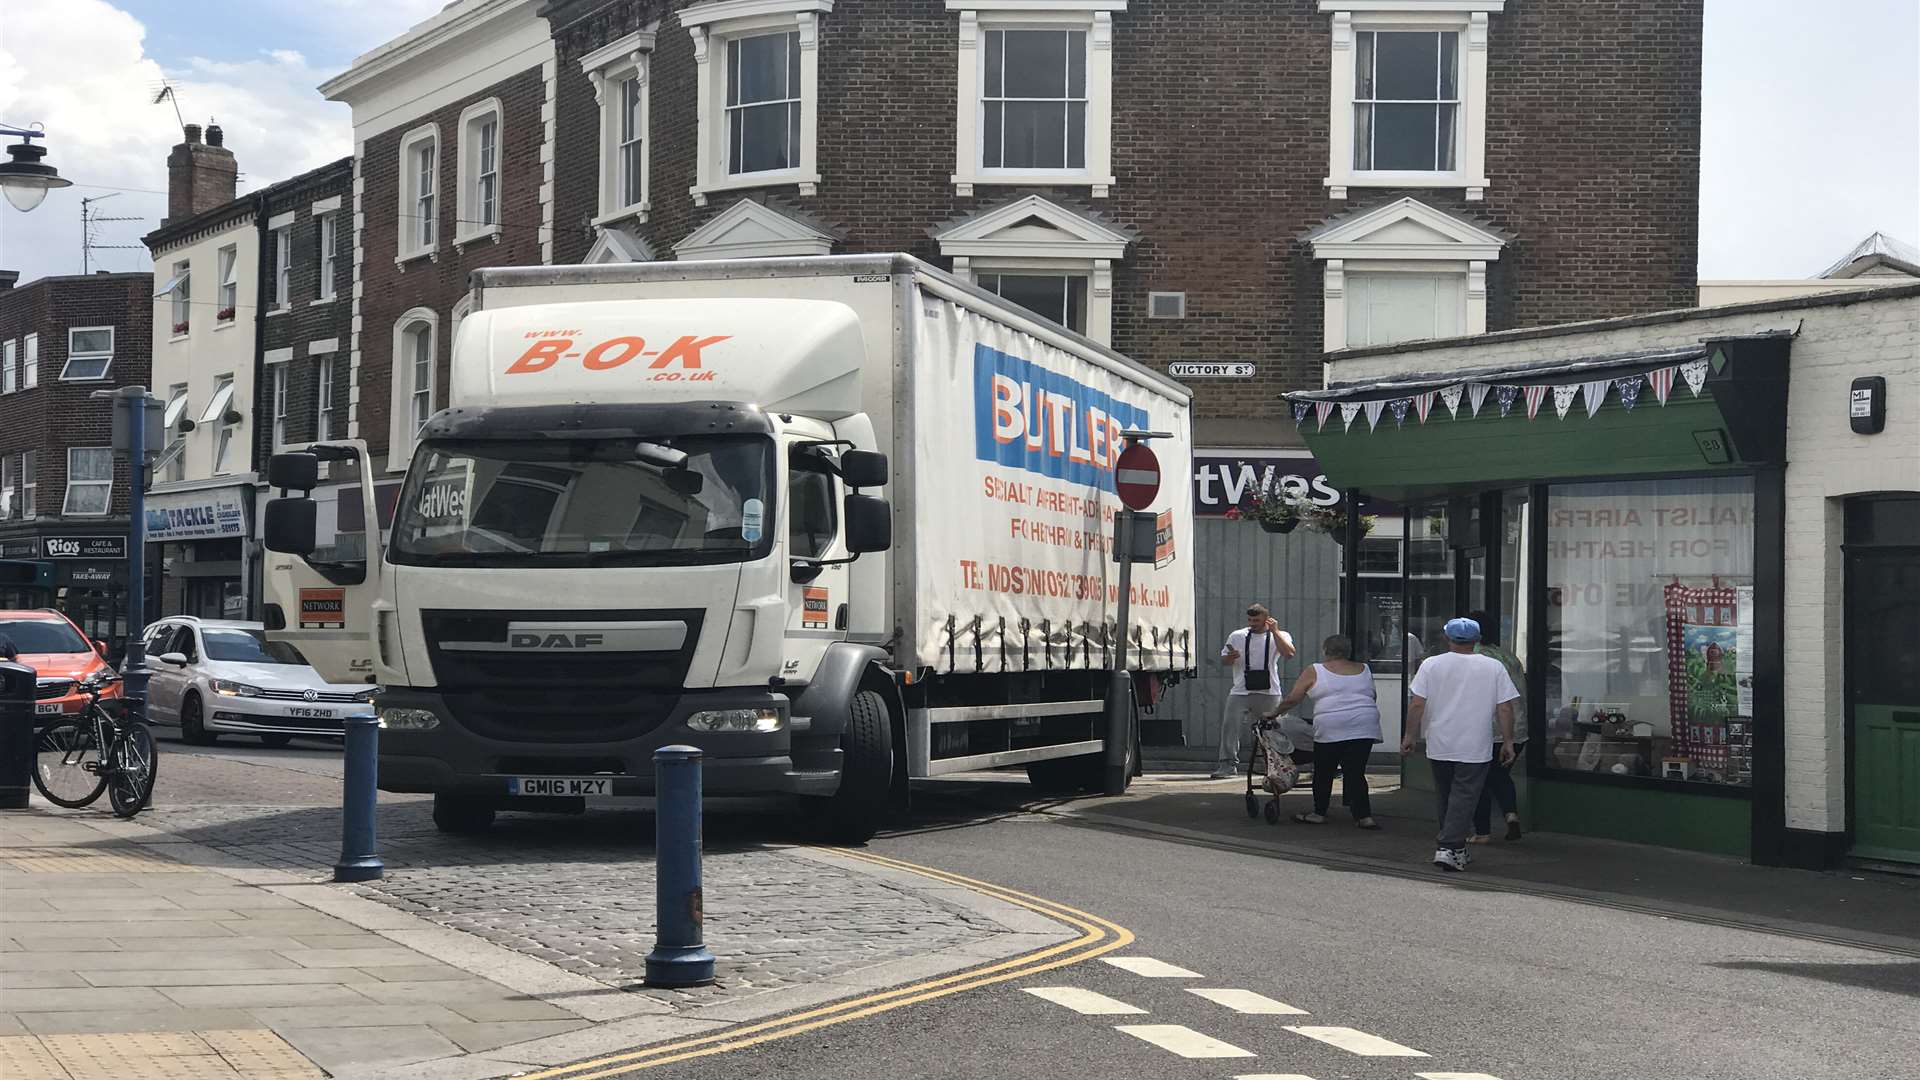 The lorry was spotted earlier struggling to get out of Victory Street.